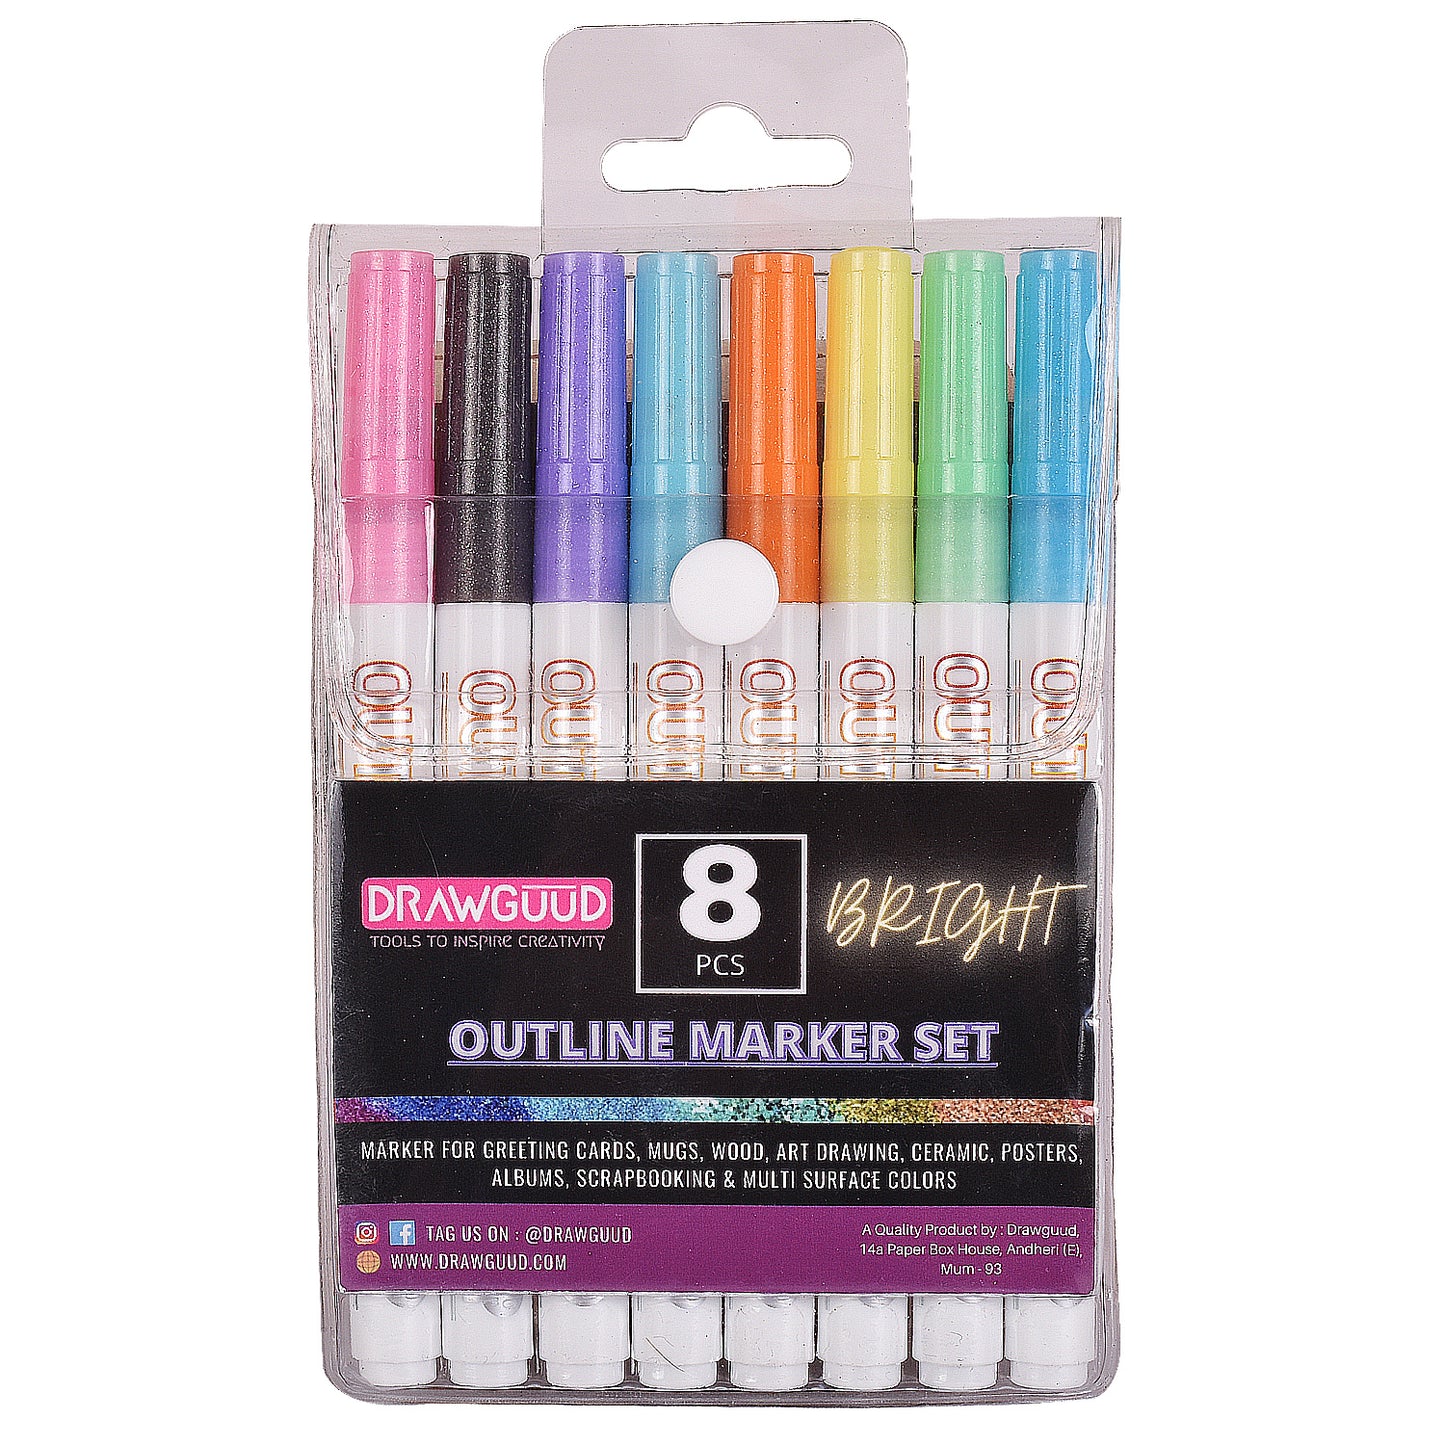  Double Line Outline Pens, 24 Colors Shimmer Markers,  Self-Outline Metallic Markers Glitter Writing Drawing Pens For  Scrapbooking, Doodling, Birthday Greeting, Markers For Kids Ages 8-12